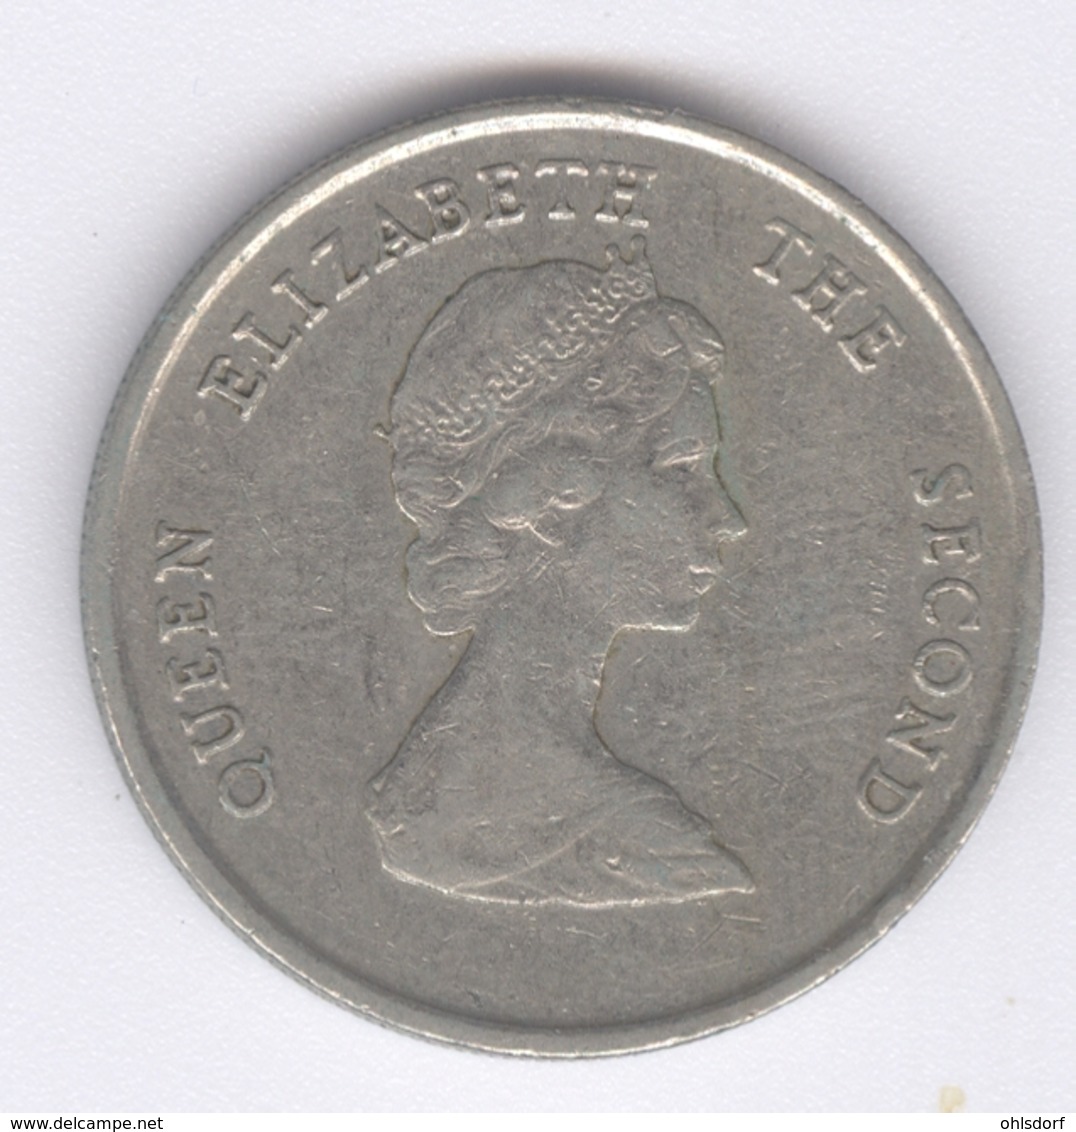 EAST CARIBBEAN STATES 1987: 25 Cents, KM 14 - East Caribbean States